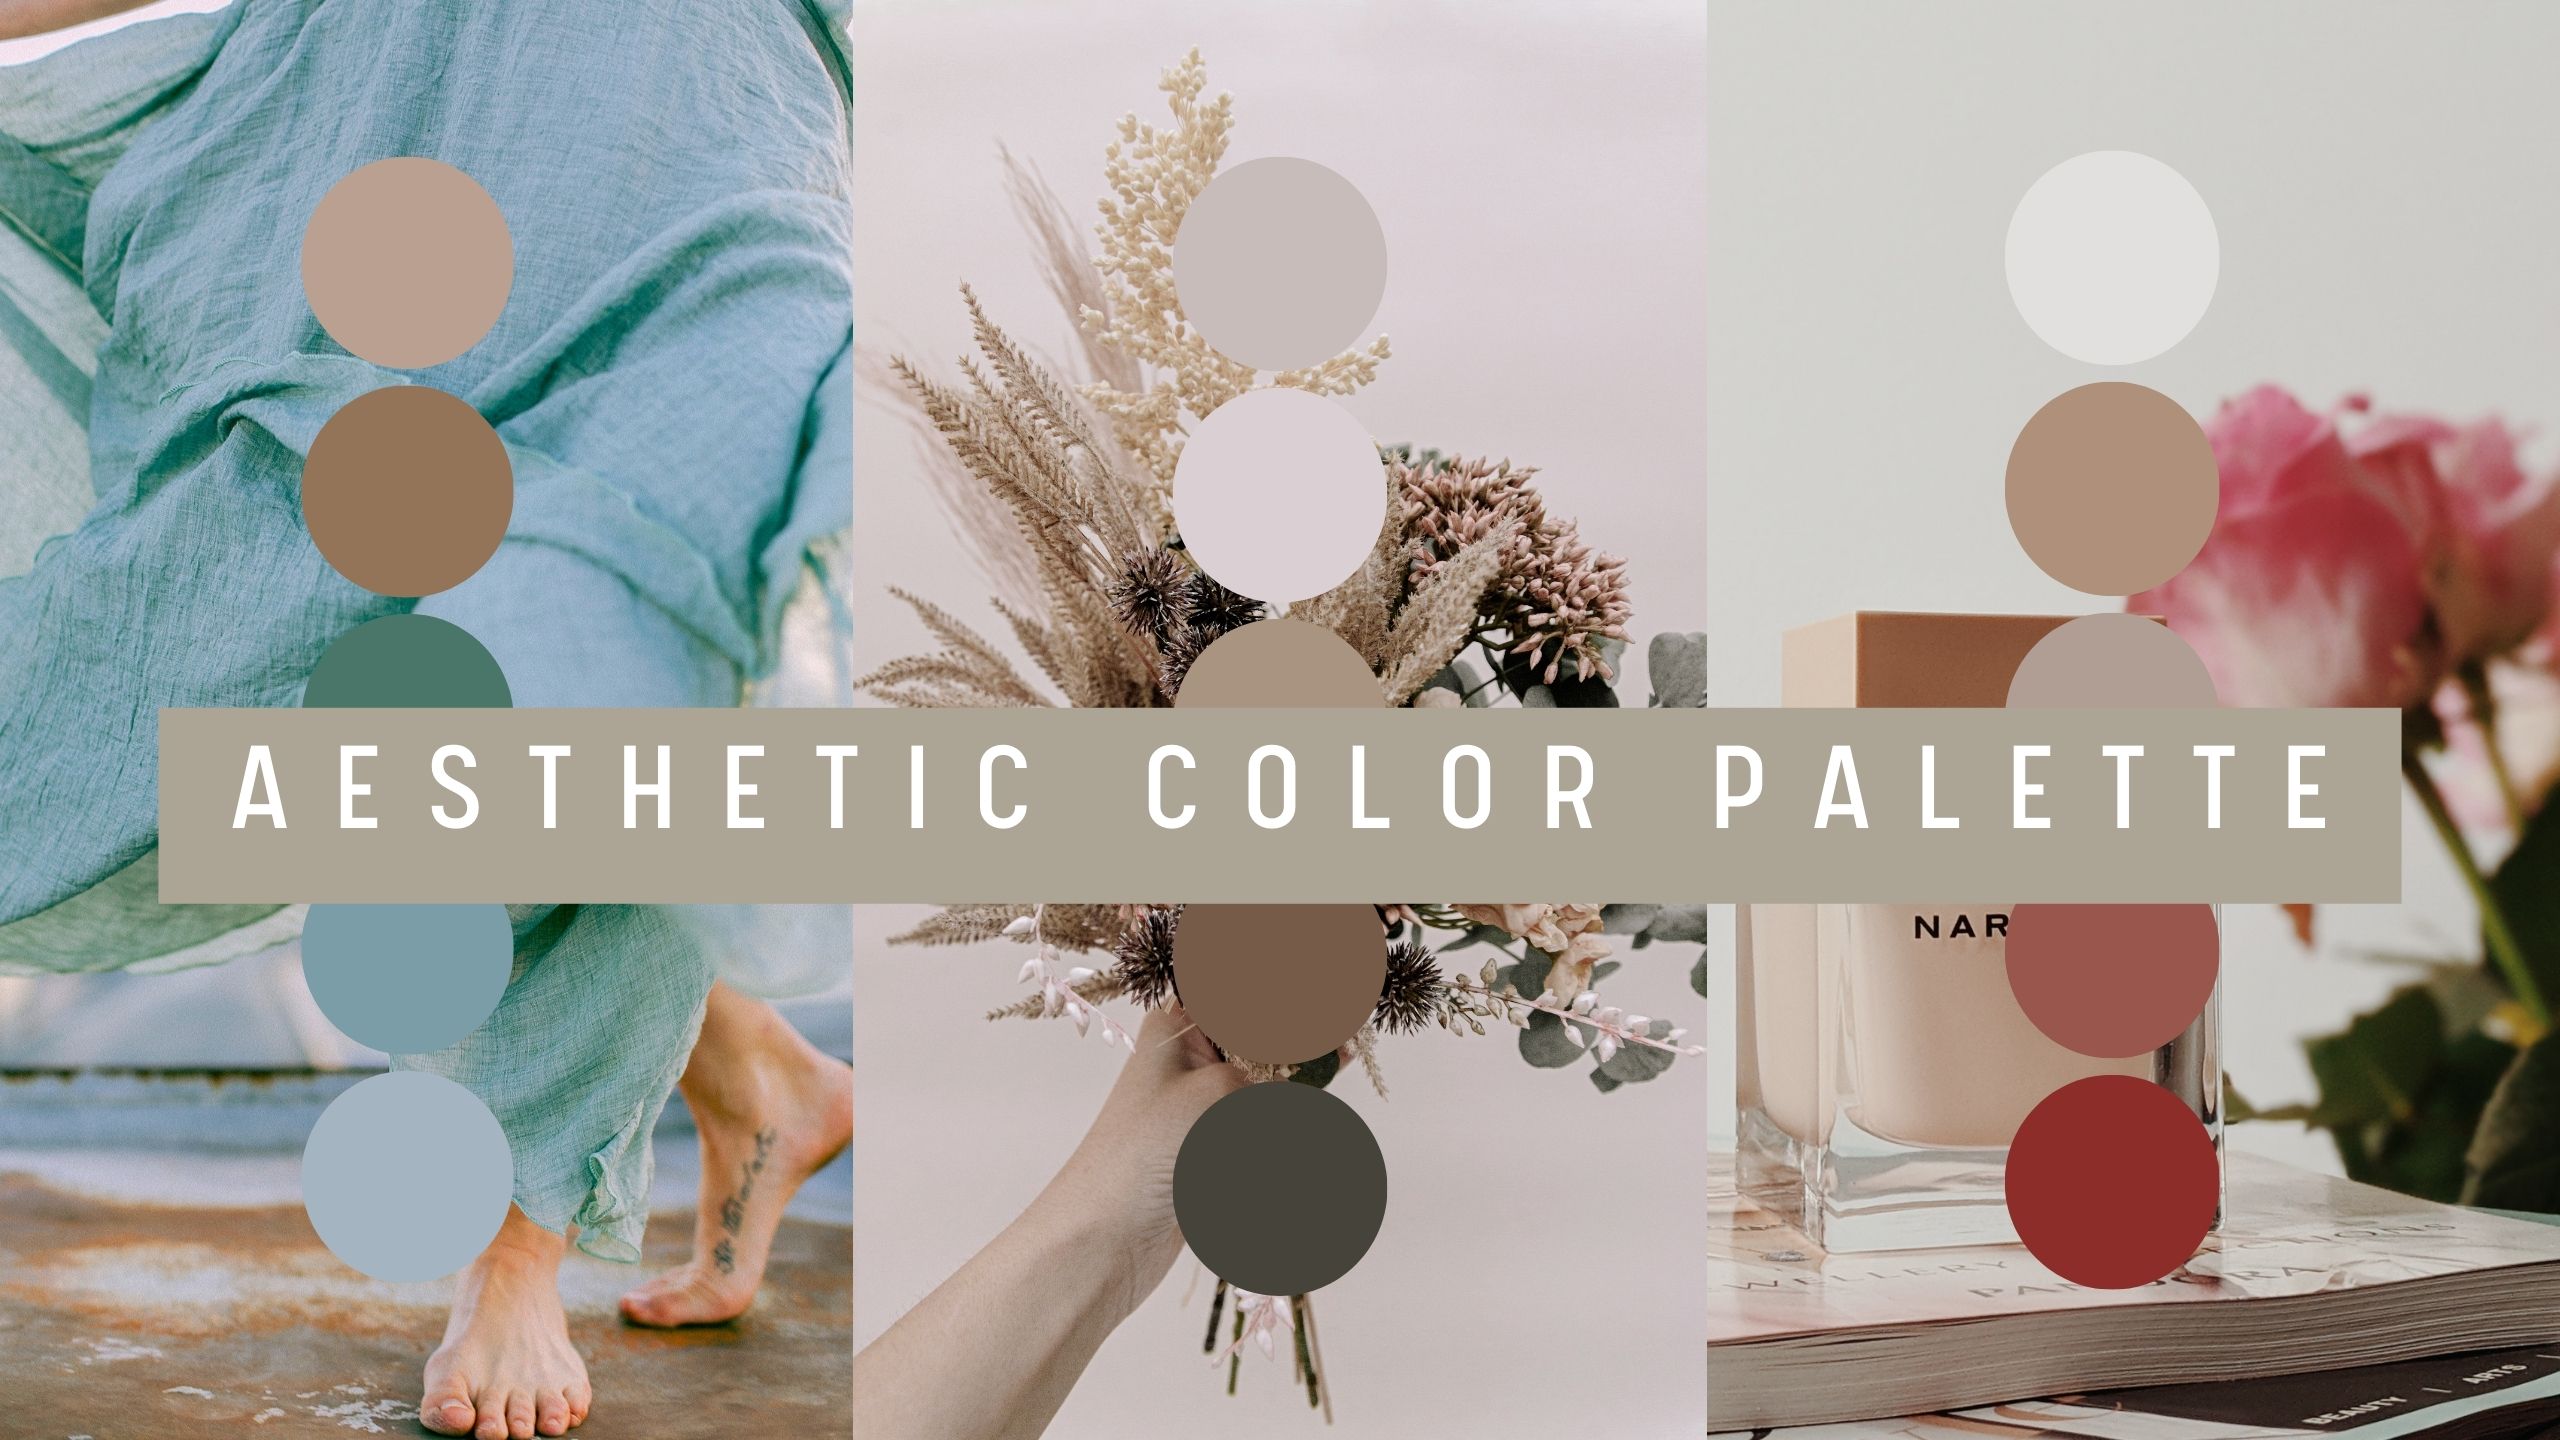 10 Aesthetic Color Palettes For Service Providers